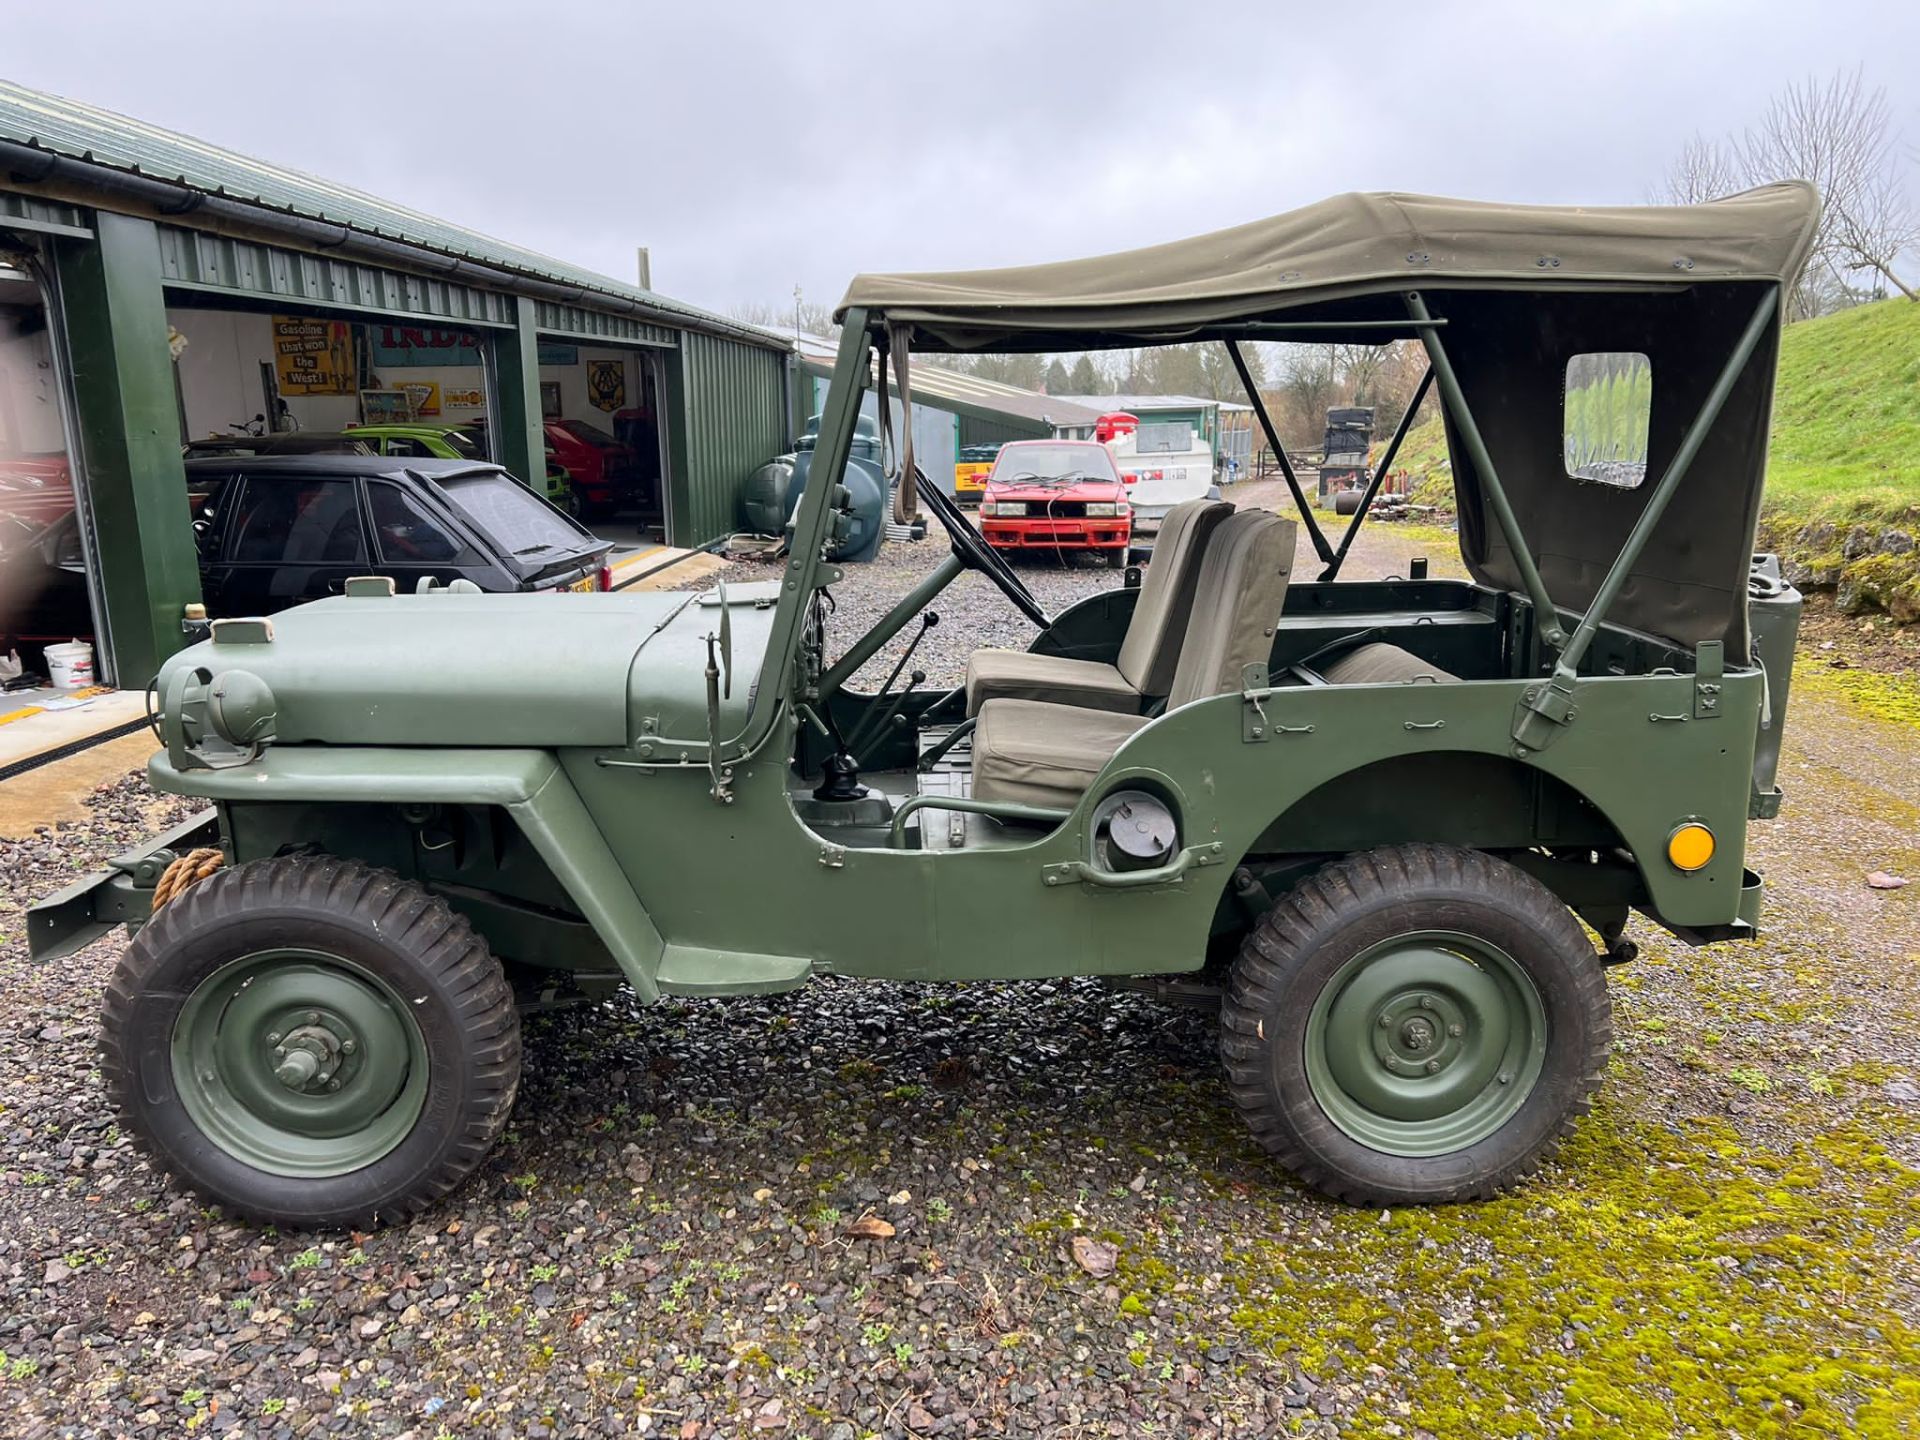 1945 Willys Jeep - Military Vehicle - Restored and raring to go... - Image 6 of 13